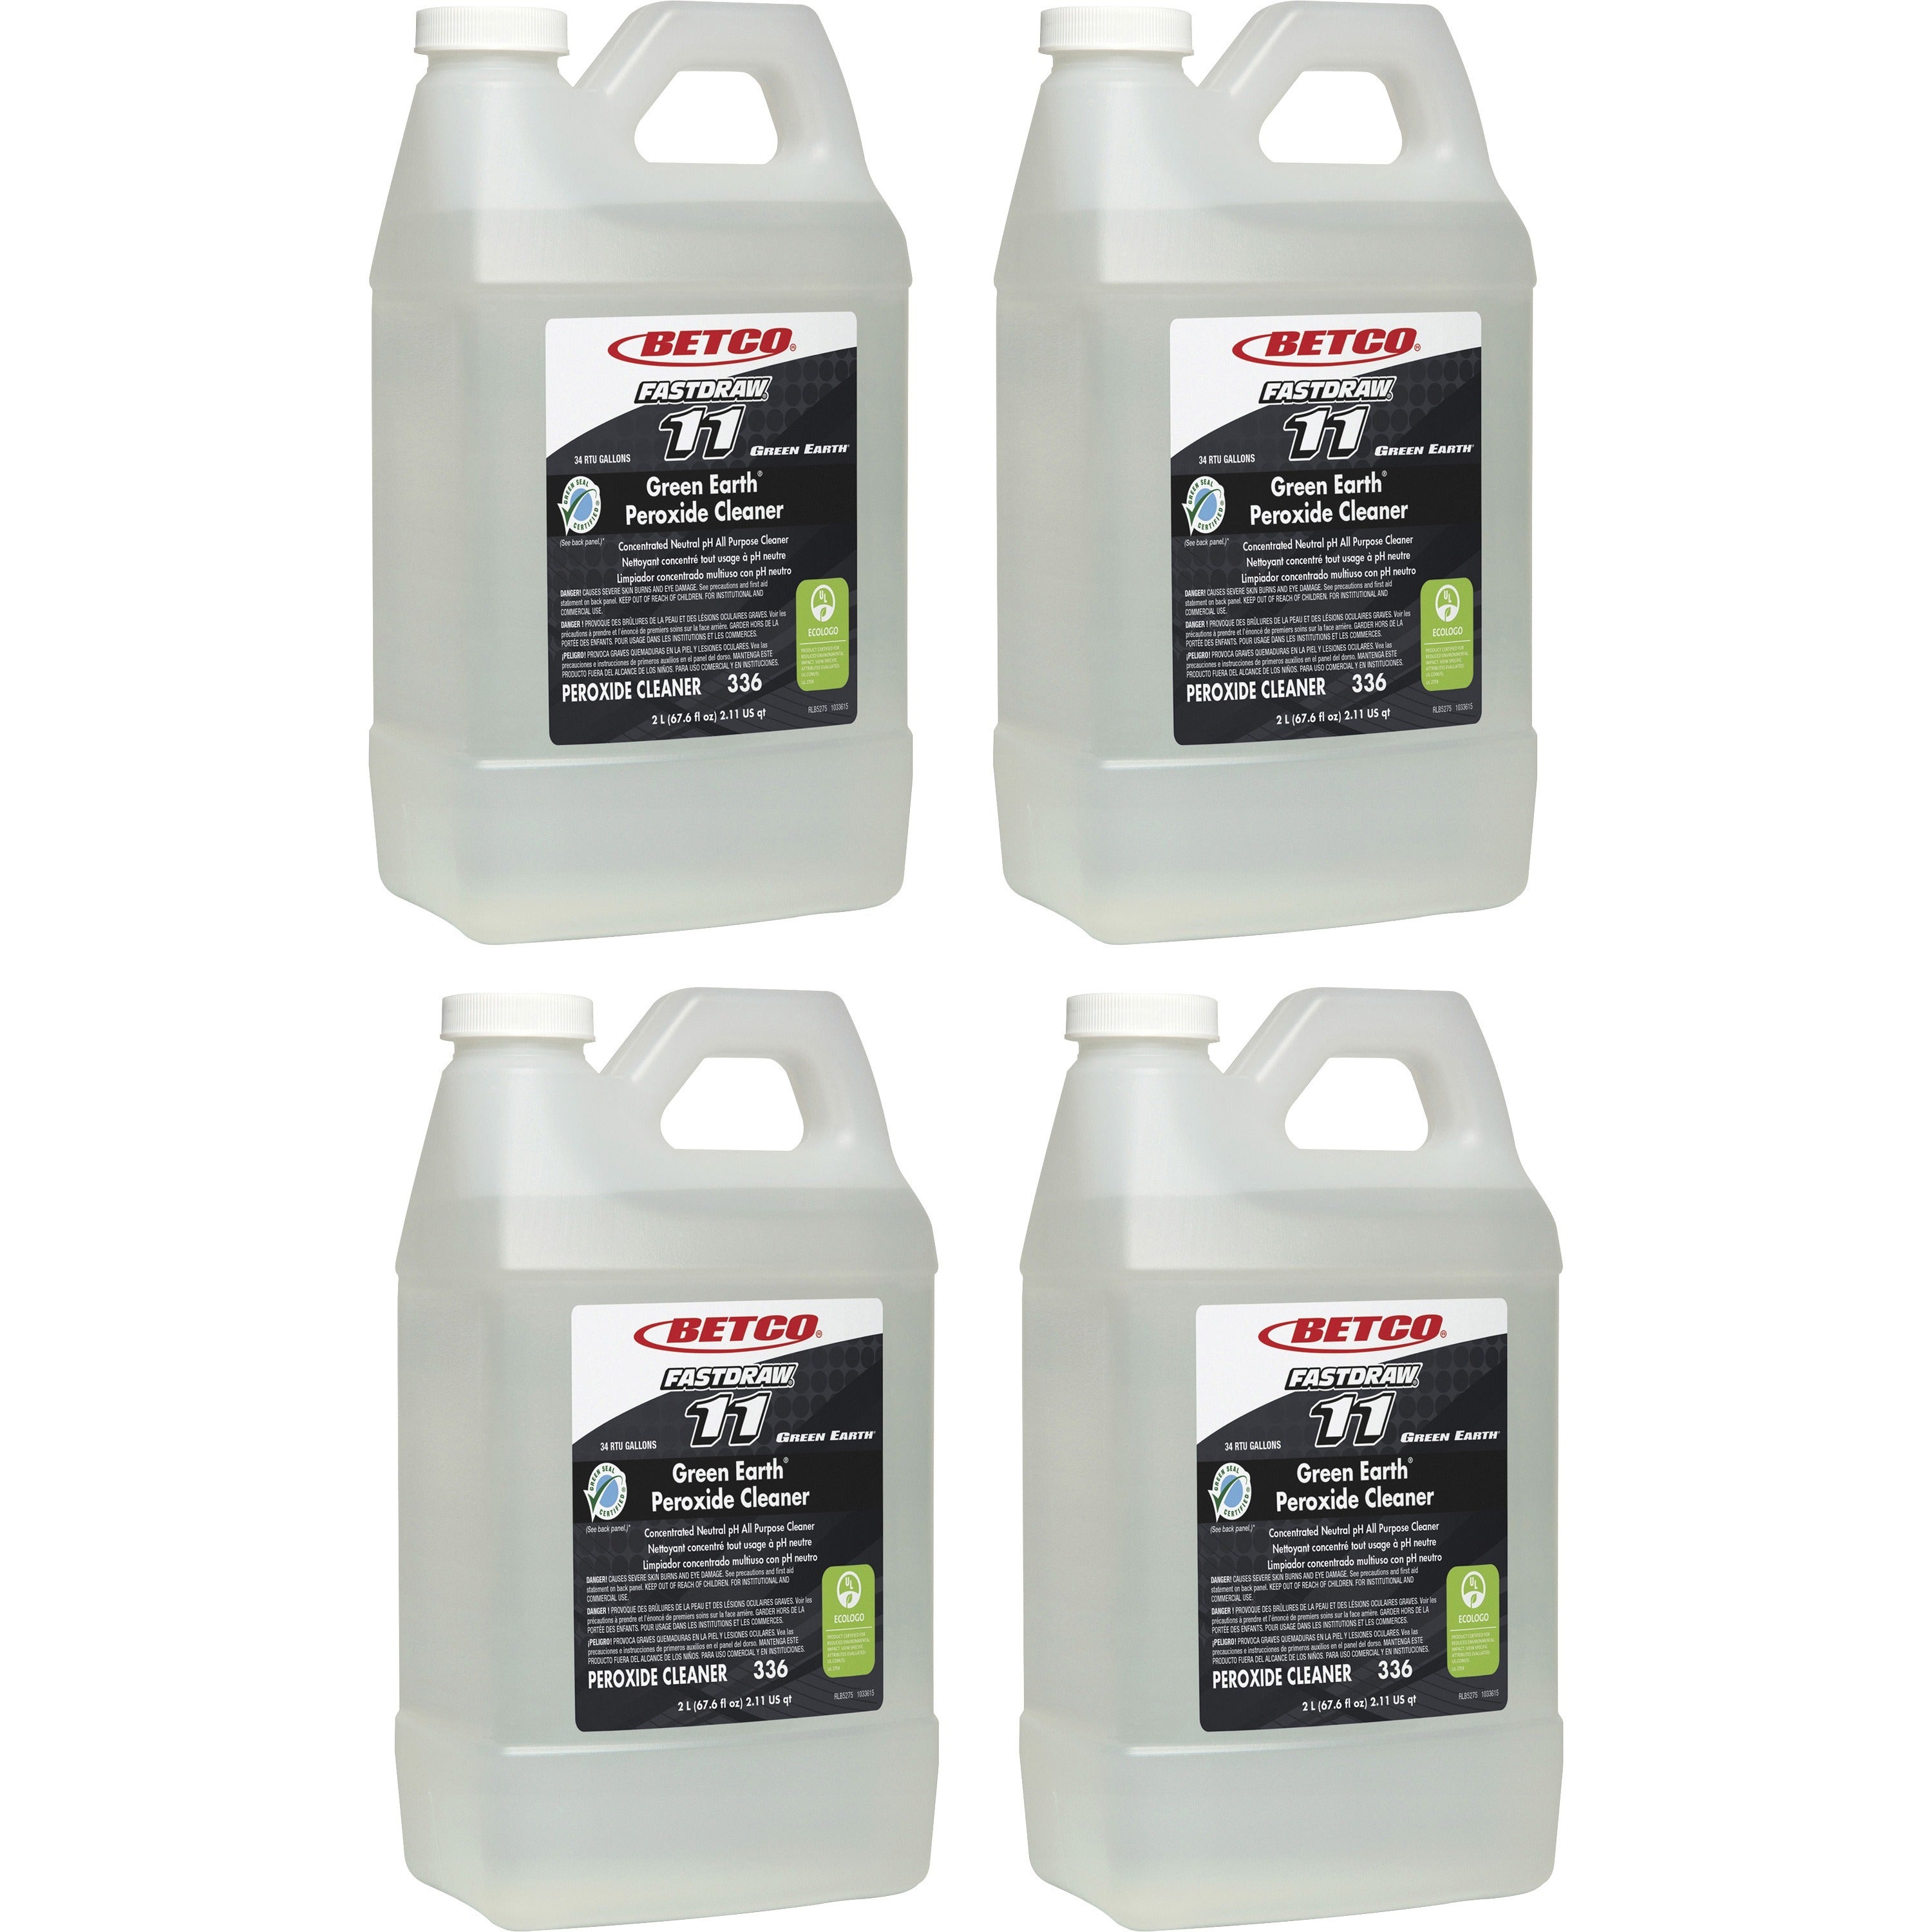 betco-green-earth-peroxide-cleaner-fastdraw-11-concentrate-676-fl-oz-21-quart-fresh-mint-scent-4-carton-clear_bet3364700ct - 1